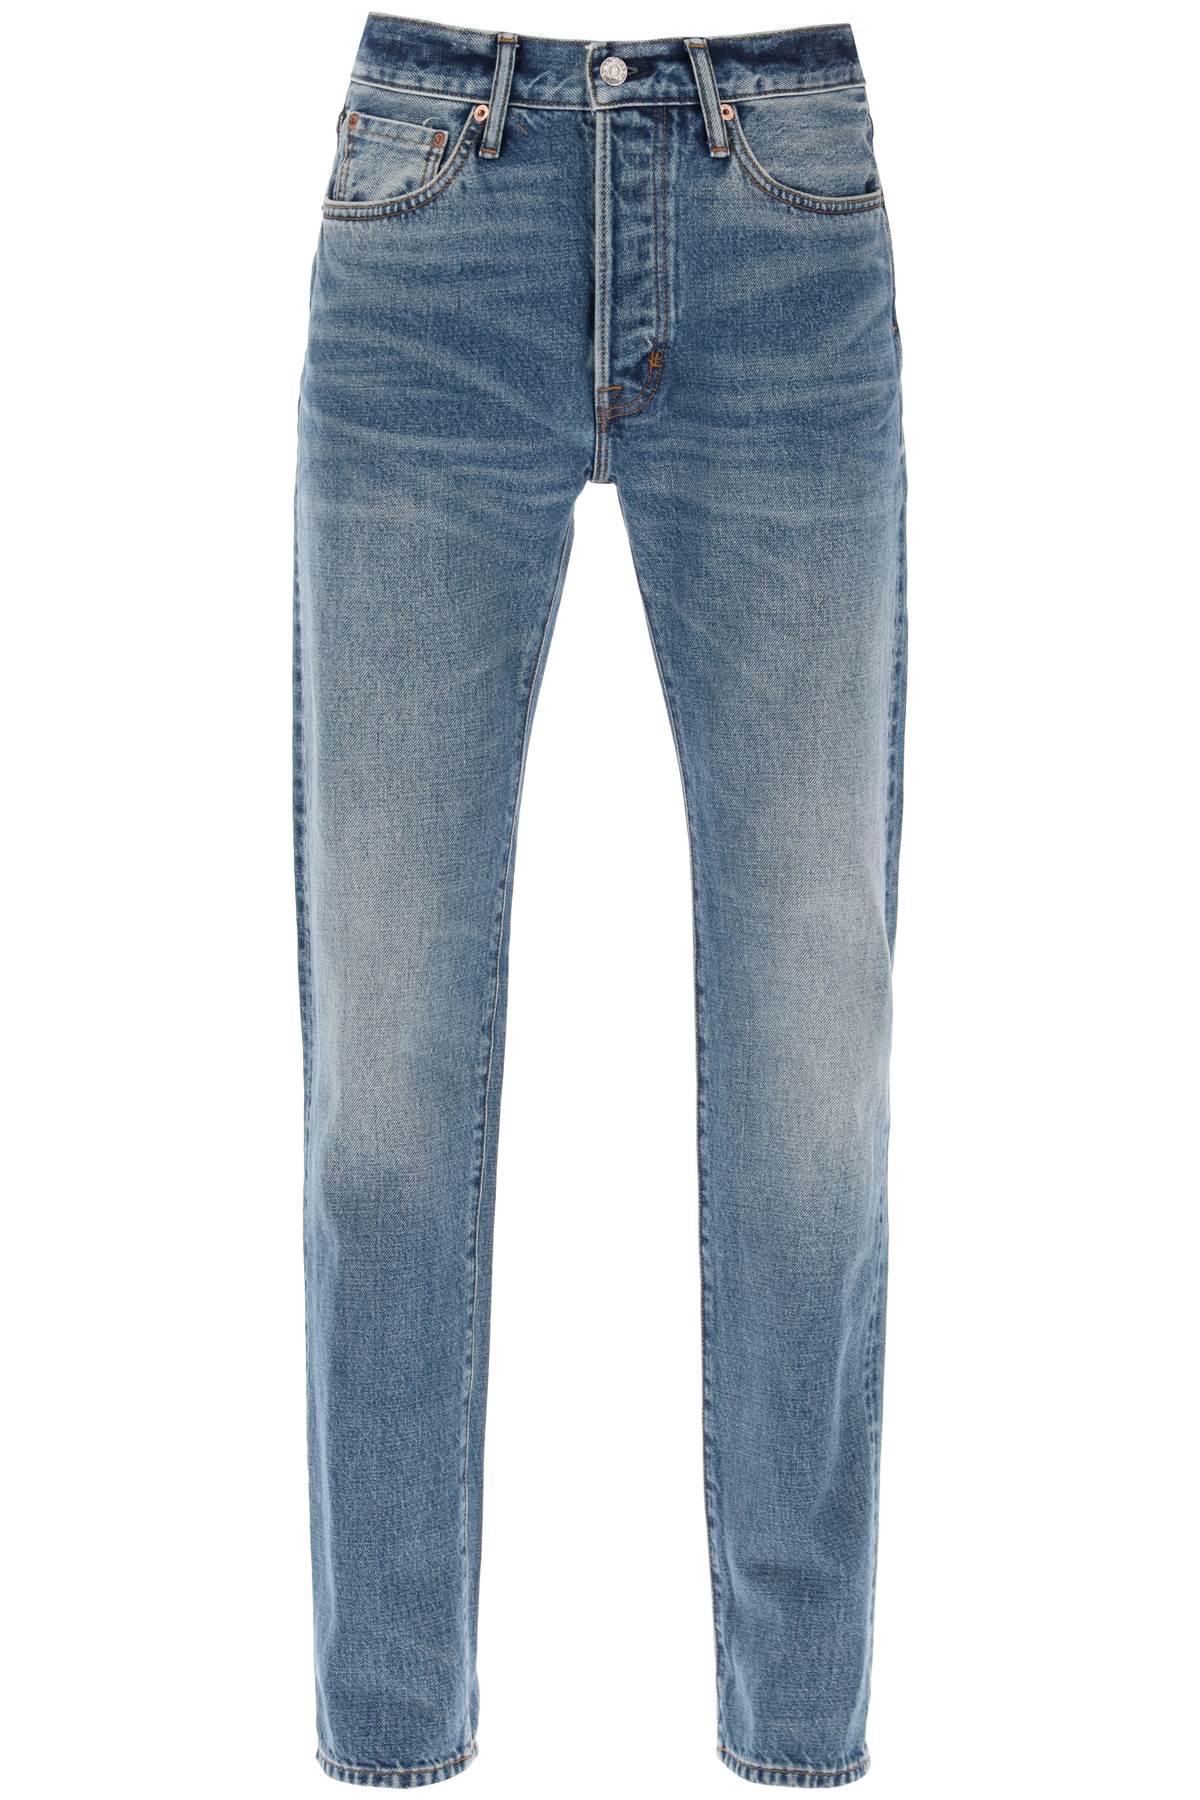 Tom ford regular fit jeans DPR001 DMC025F23 NEW STRONG HIGH LOW